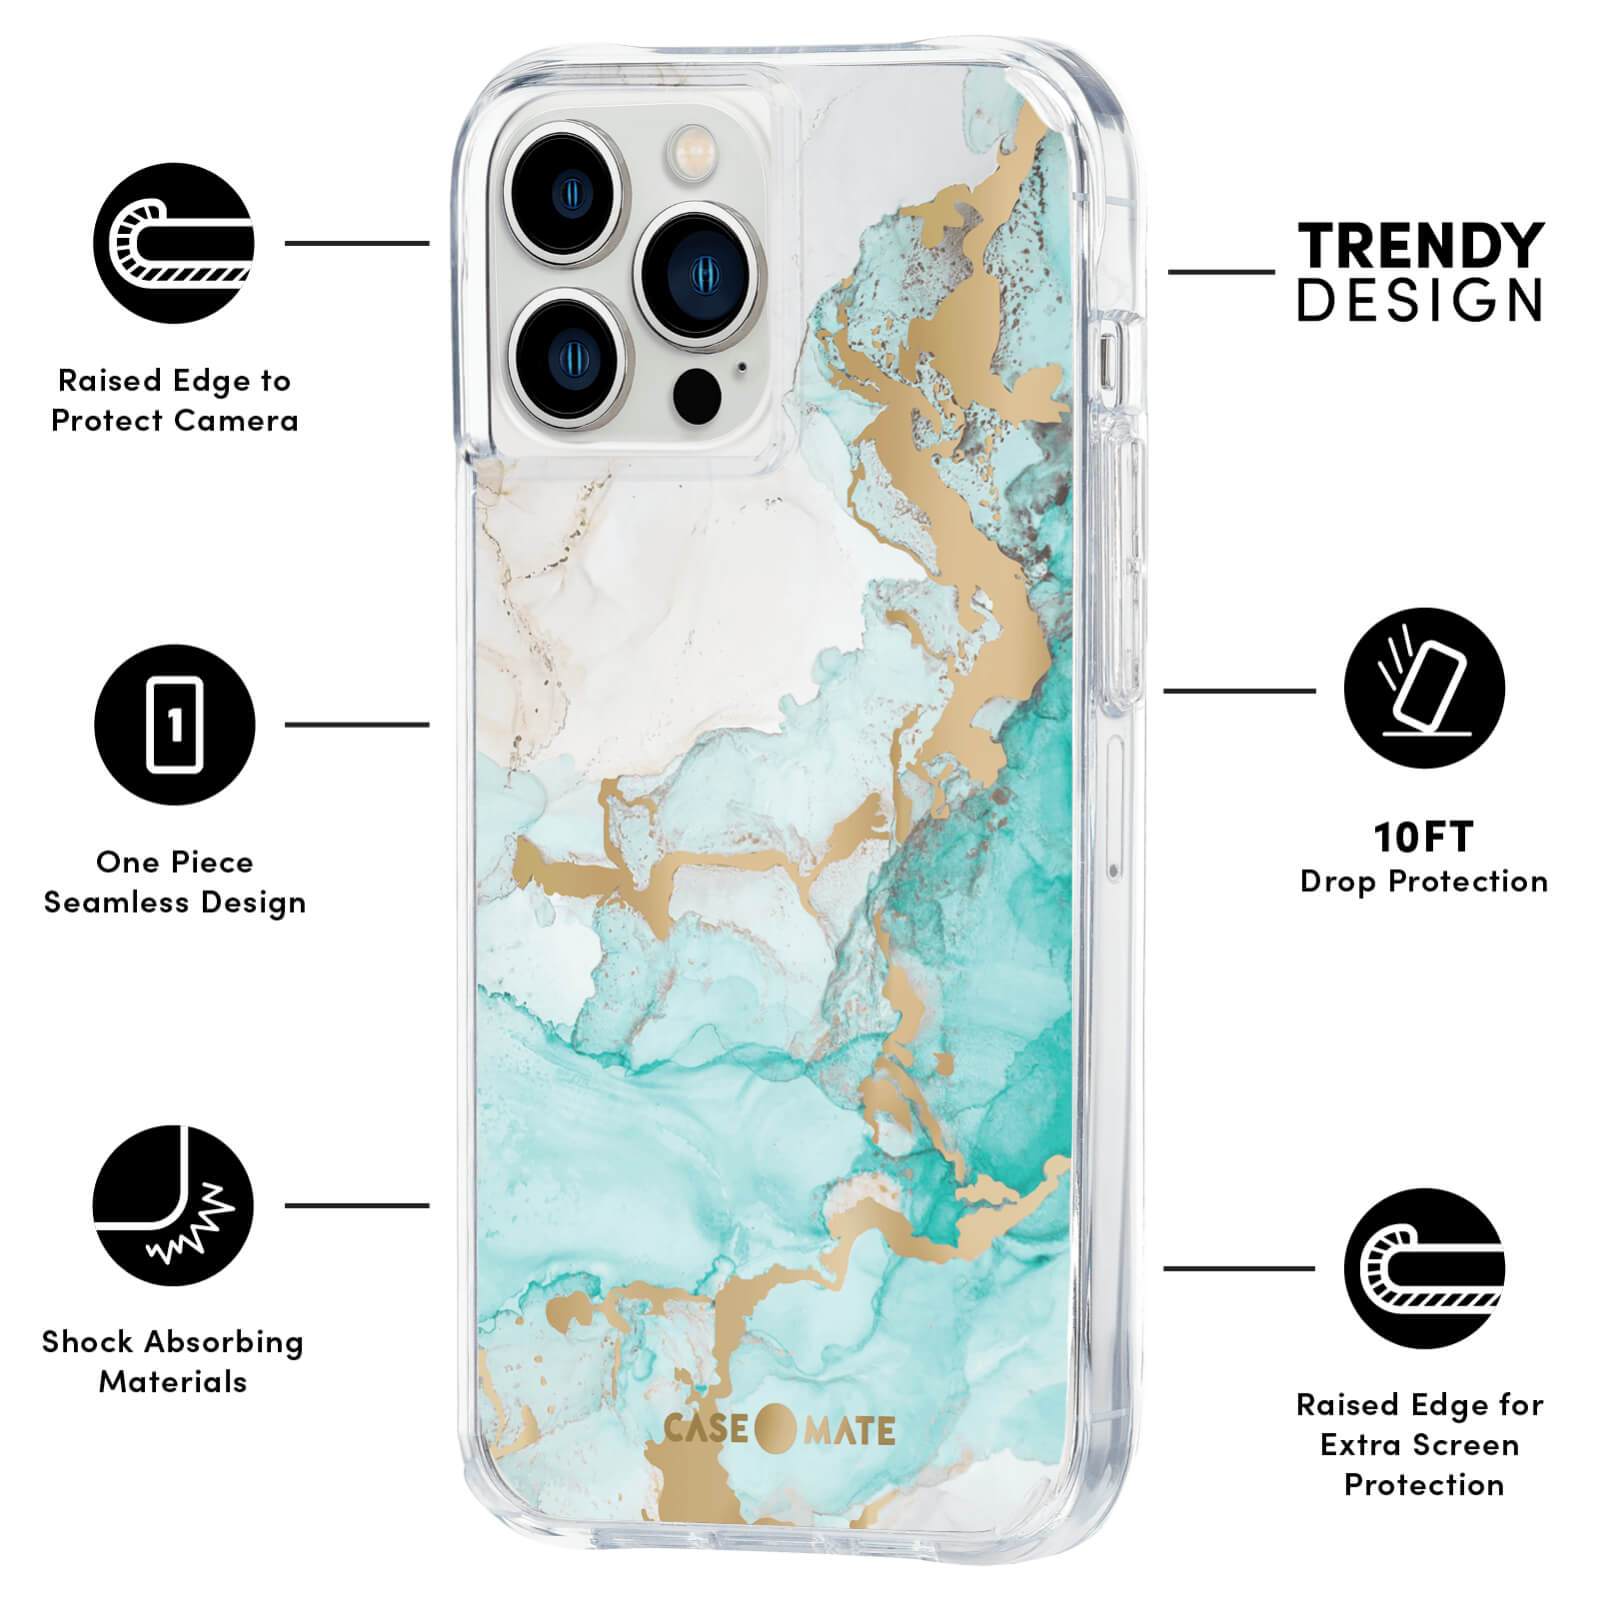 FEATURES: RAISED CAMERA TO PROTECT CAMERA, ONE PIECE SEAMLESS DESIGN, SHOCK ABSORBING MATERIALS, TRENDY DESIGN, 10 FT DROP PROTECTION, RAISED EDGE FOR EXTRA SCREEN PROTECTION. COLOR::OCEAN MARBLE